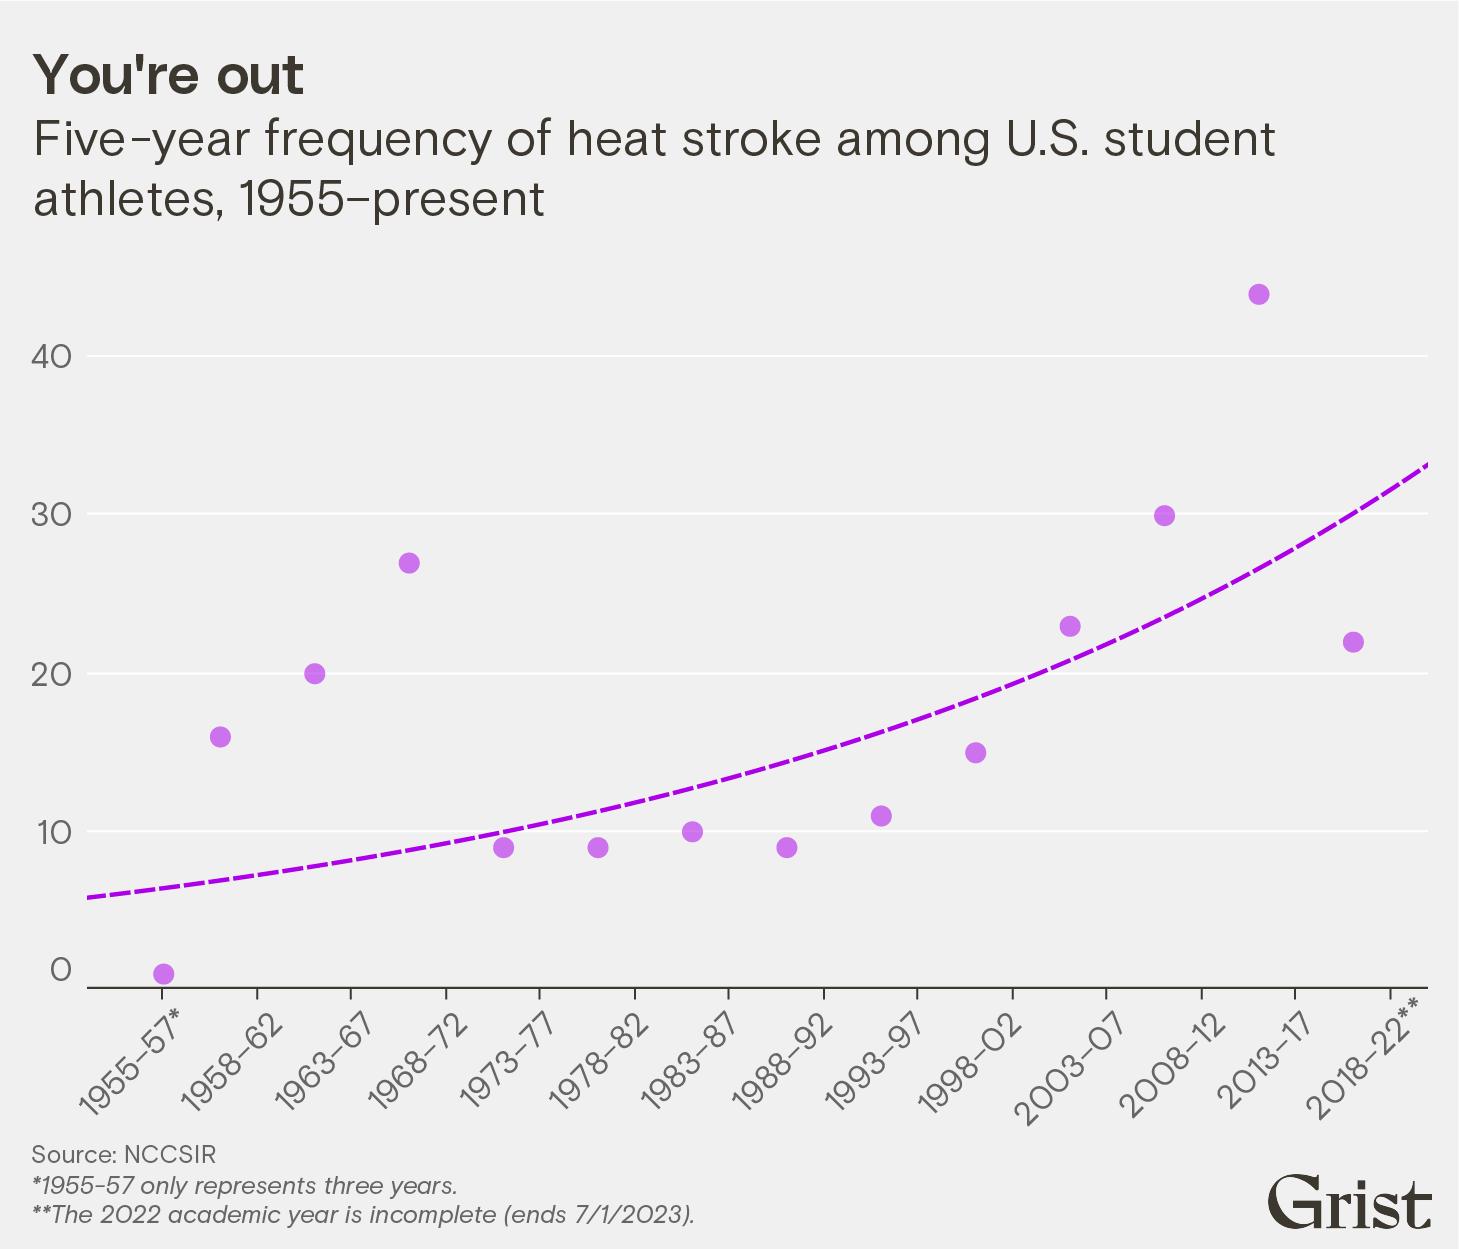 A scatterplot showing the 5-year incidence of heat stroke among US student athletes from 1955 to the present.  A purple dashed line shows that the trend has increased exponentially over this period.